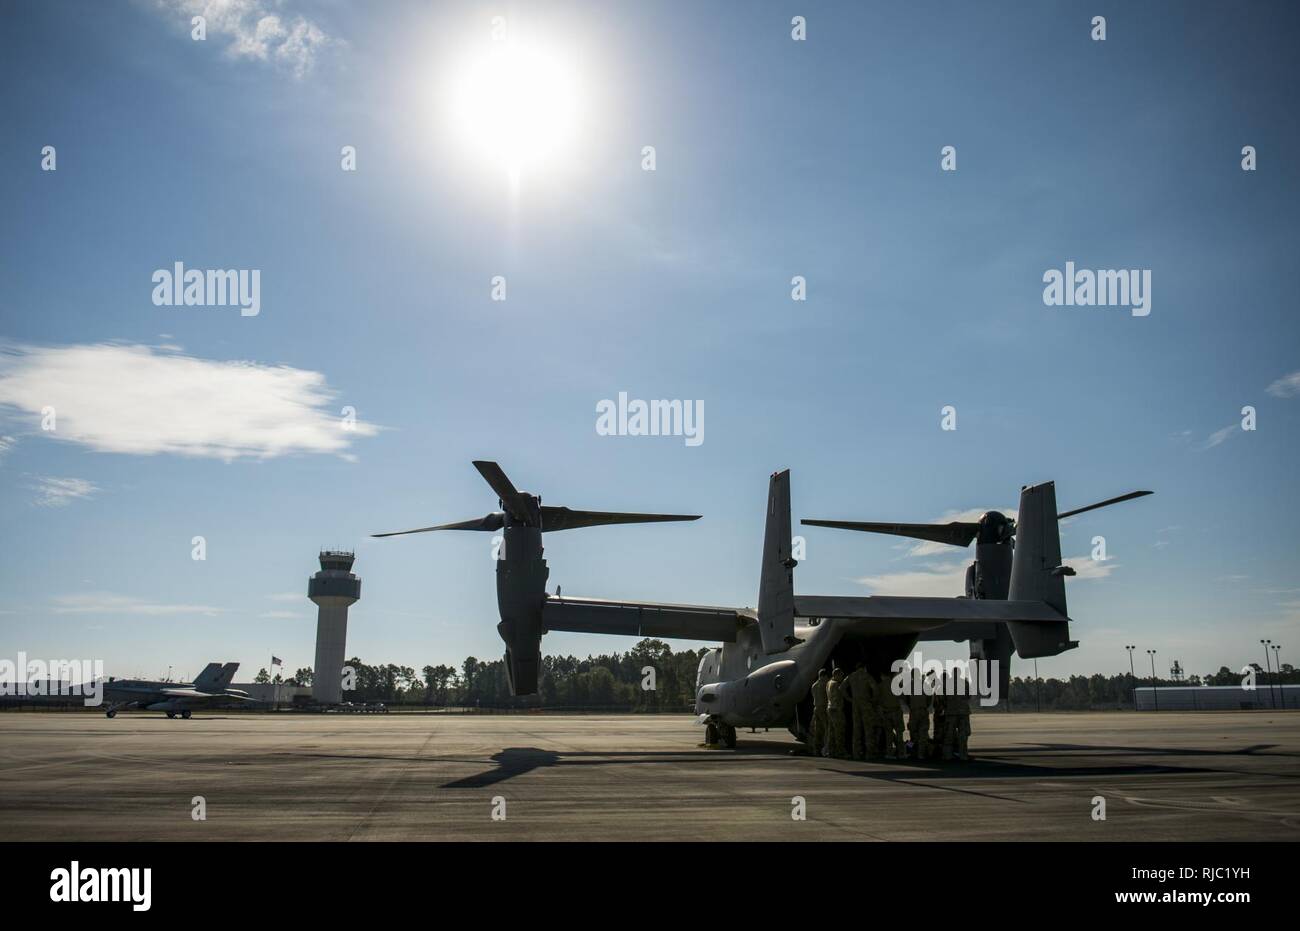 A U.S. Air Force CV-22 Osprey aircrew with the 8th Special Operations Squadron receive a pre-mission brief at the Gulfport Combat Readiness Training Center, Miss., during Southern Strike 17, Nov. 2, 2016. Southern Strike 17 is a total force, multi-service training exercise hosted by the Mississippi Air National Guard’s Combat Readiness Training Center in Gulfport, Miss., from Oct. 24 through Nov. 4, 2016. The exercise emphasizes air-to-air, air-to-ground and special operations forces training opportunities. These events are integrated into demanding hostile and asymmetric scenarios with action Stock Photo